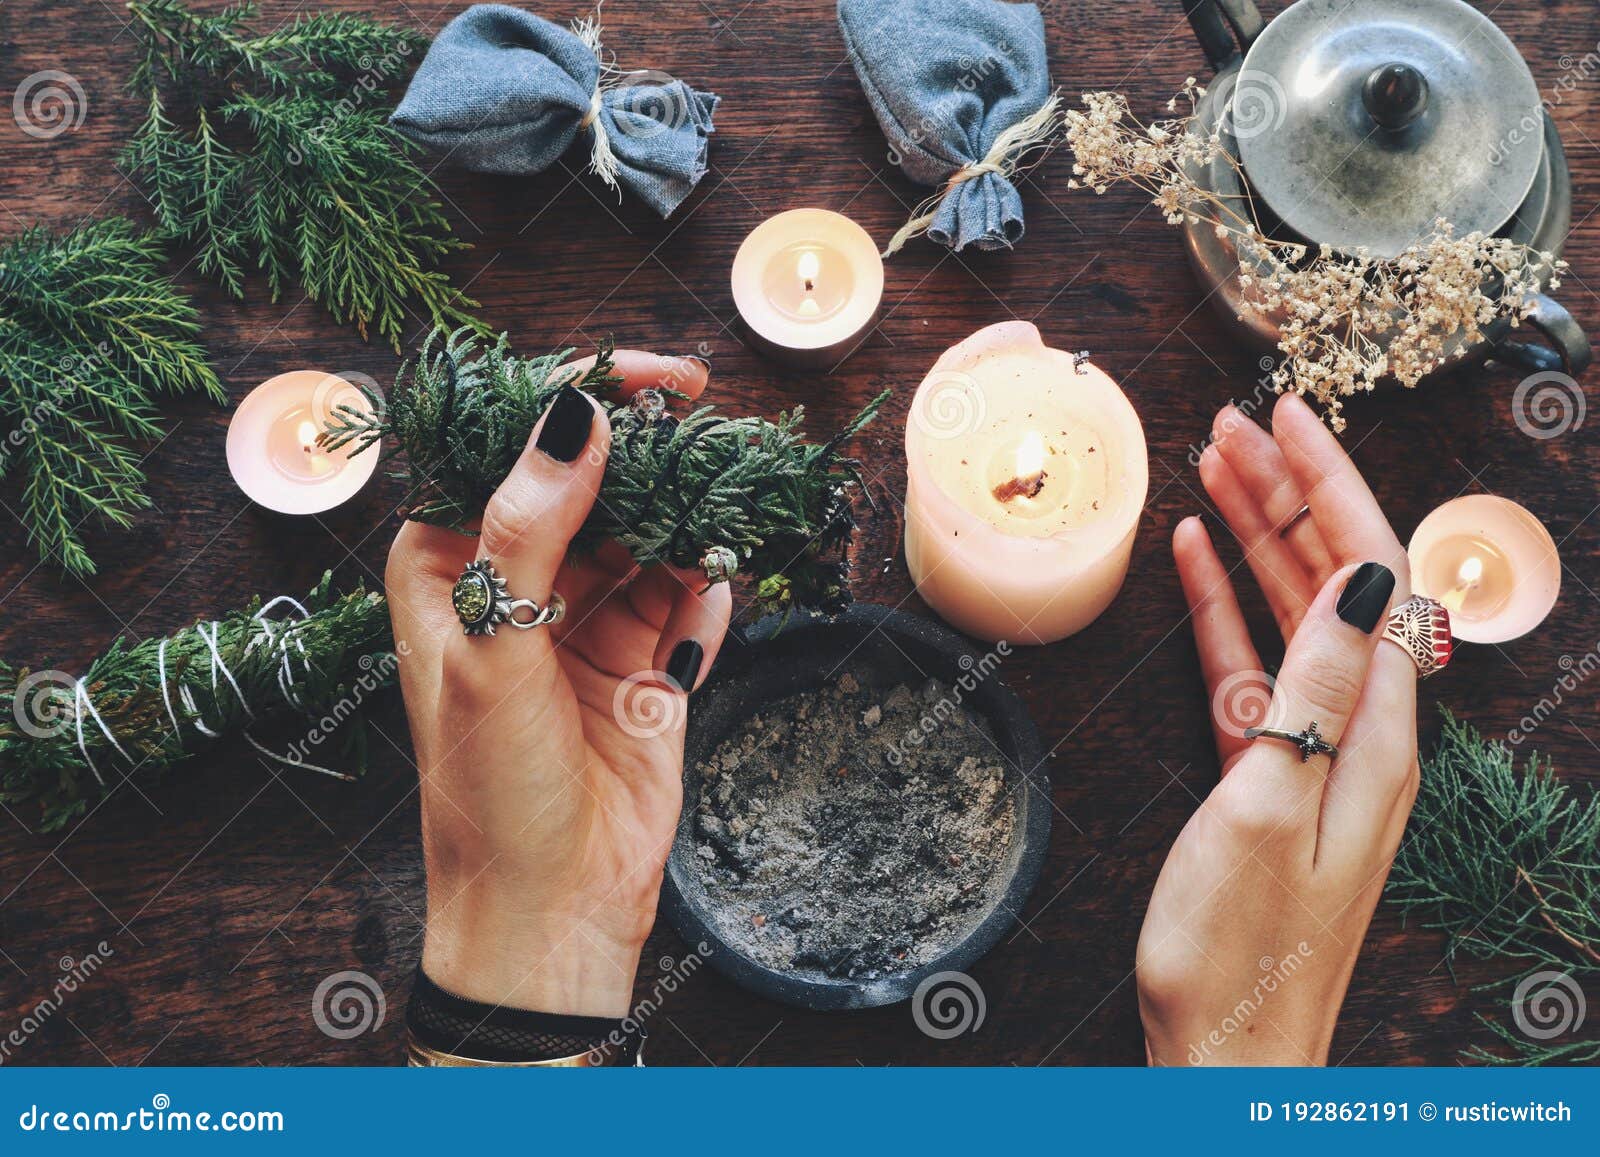 wiccan witch holding cedar cleansing stick to cleanse the energy at her altar